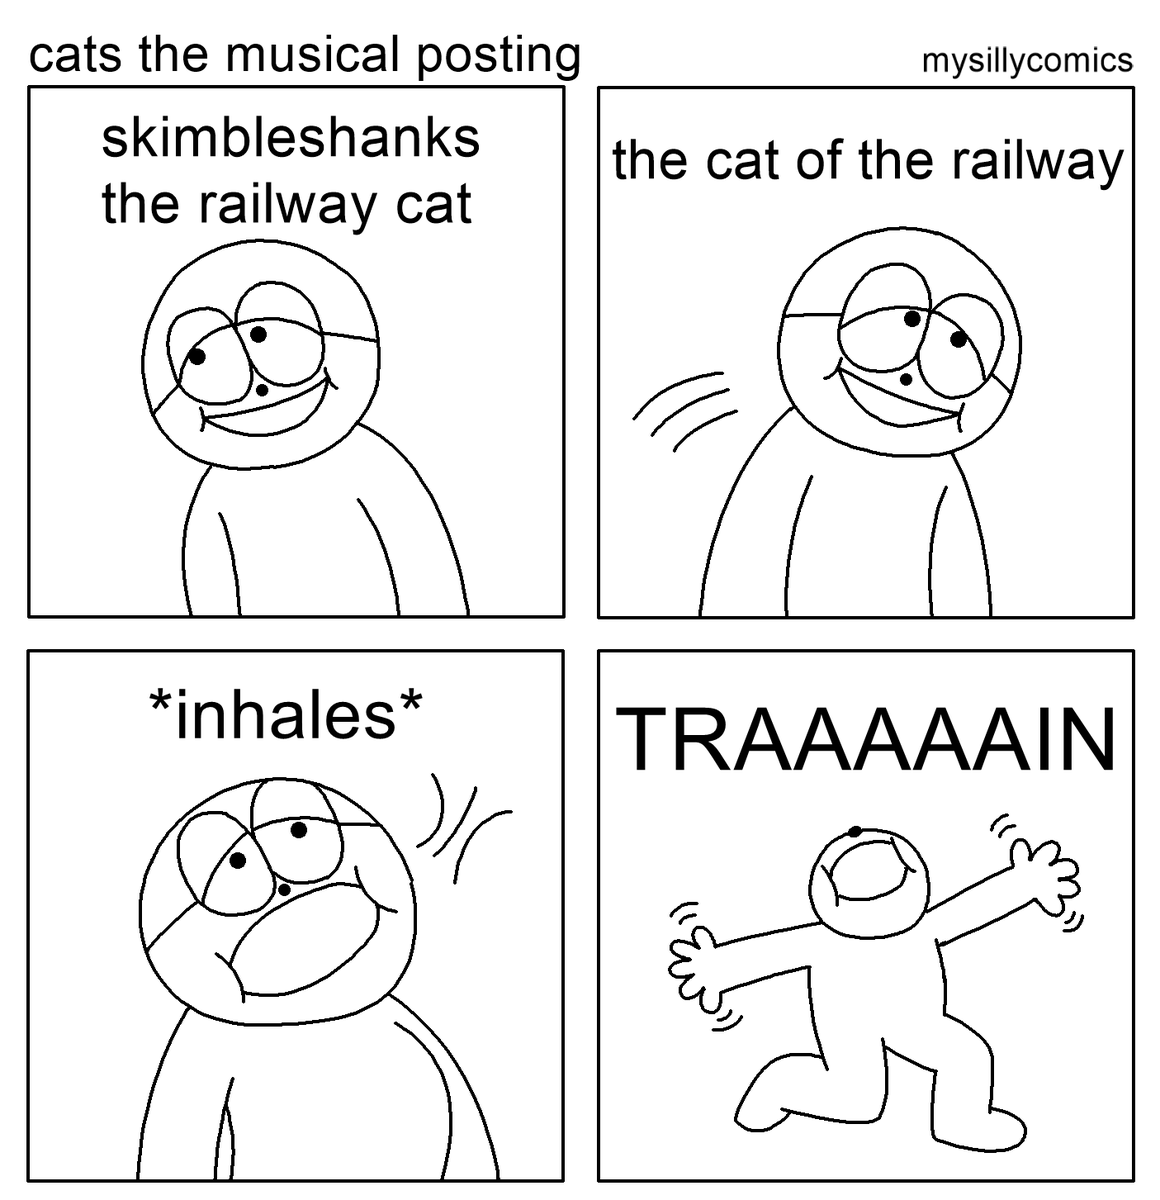 6 am time to post about Cats the Musical 